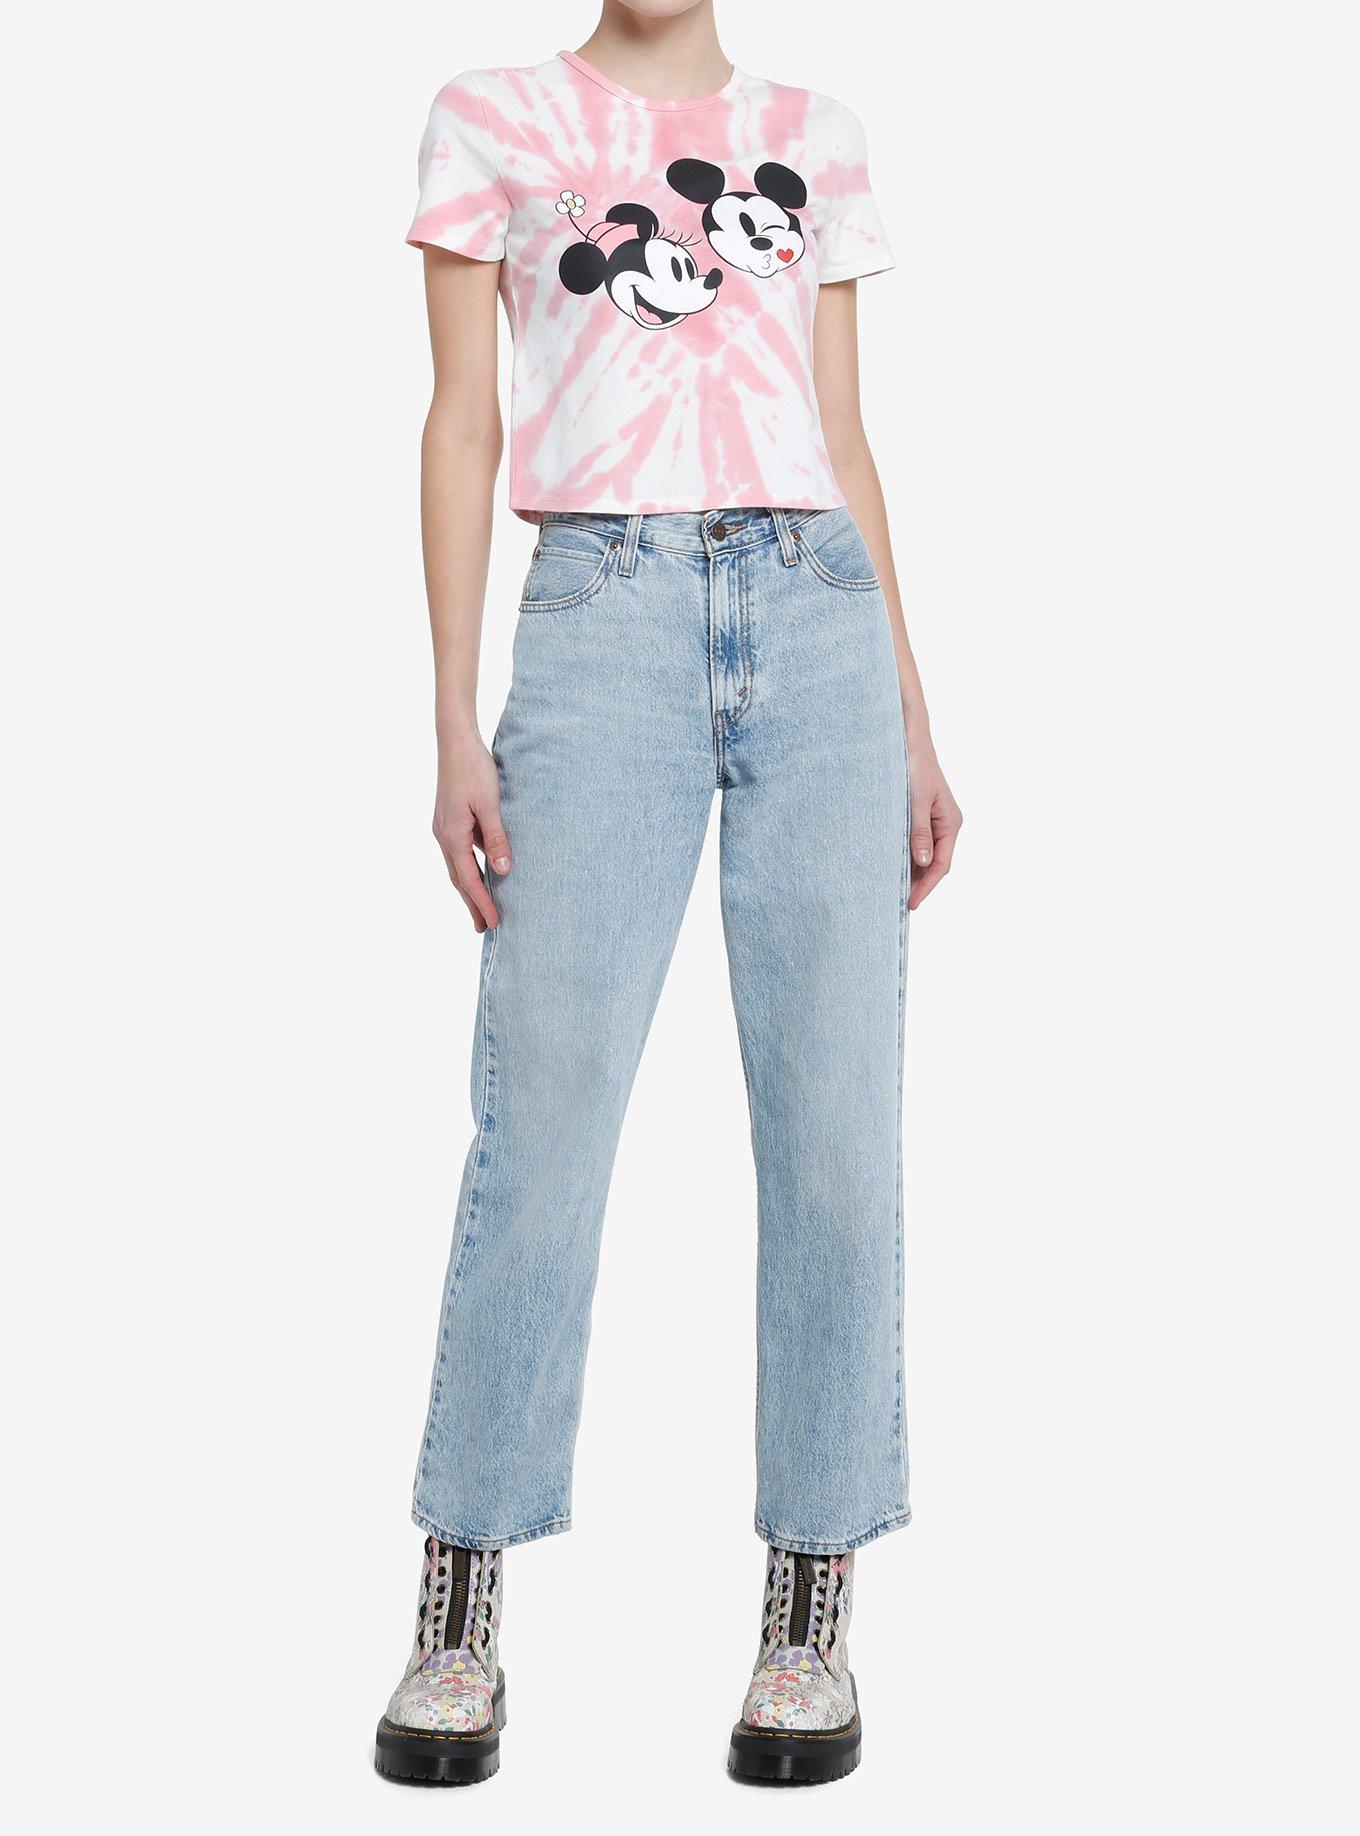 Her Universe Disney Mickey Mouse & Minnie Mouse Kiss Tie-Dye Crop T-Shirt, LIGHT PINK, alternate